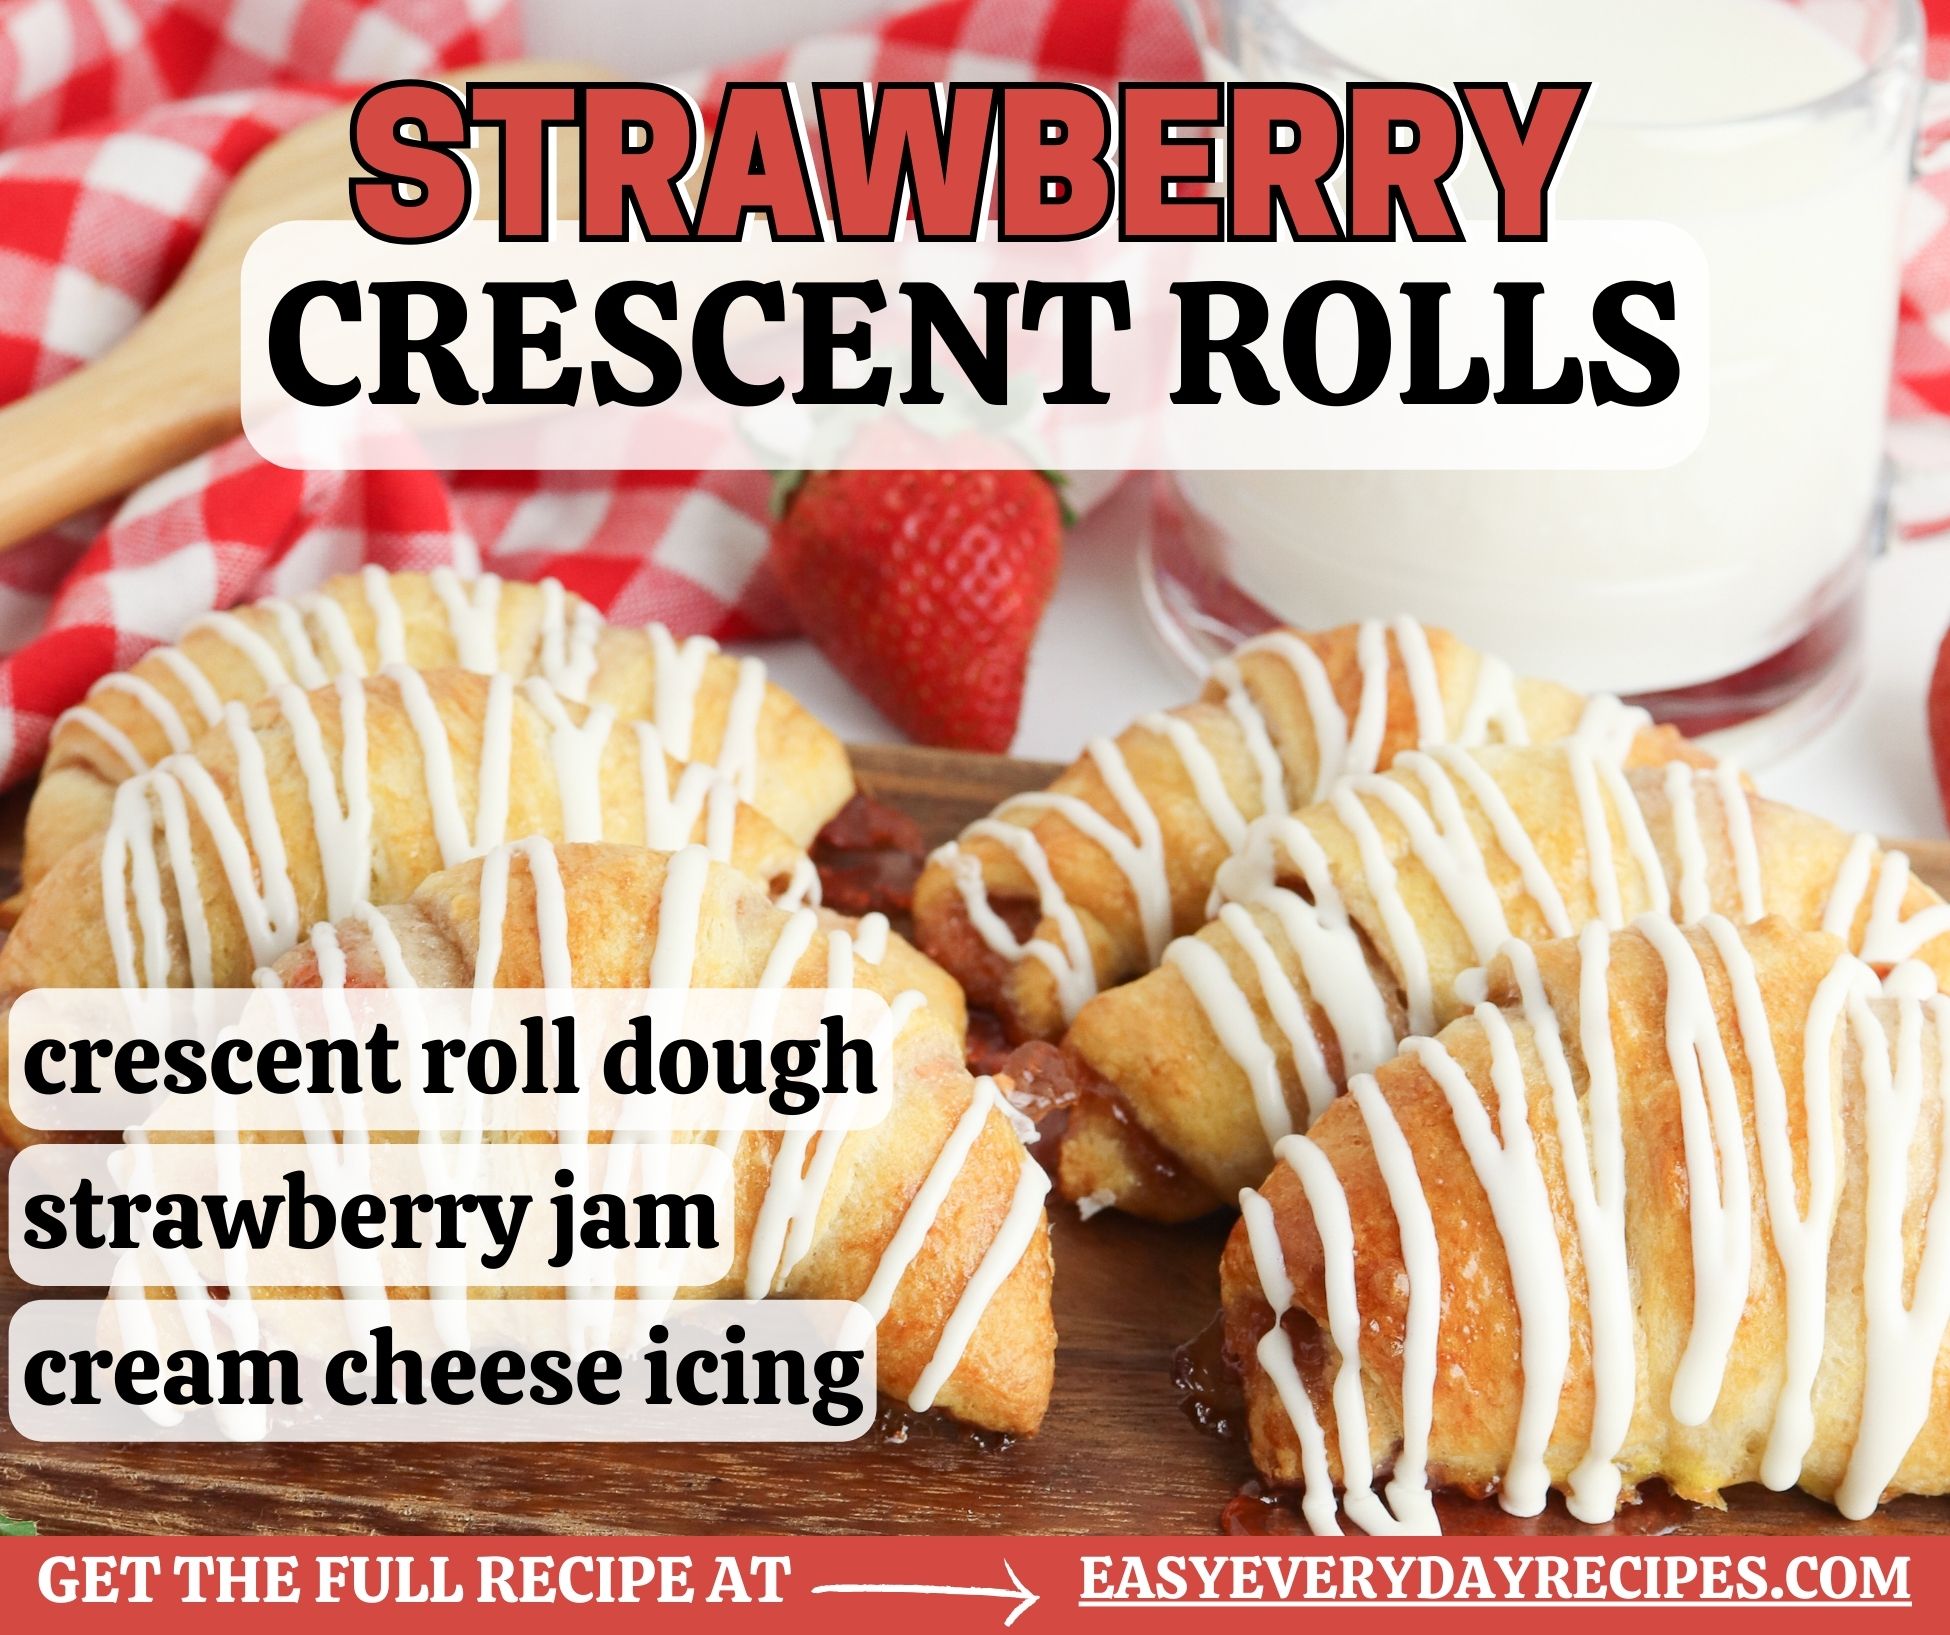 Strawberry crescent rolls with icing on a plate.